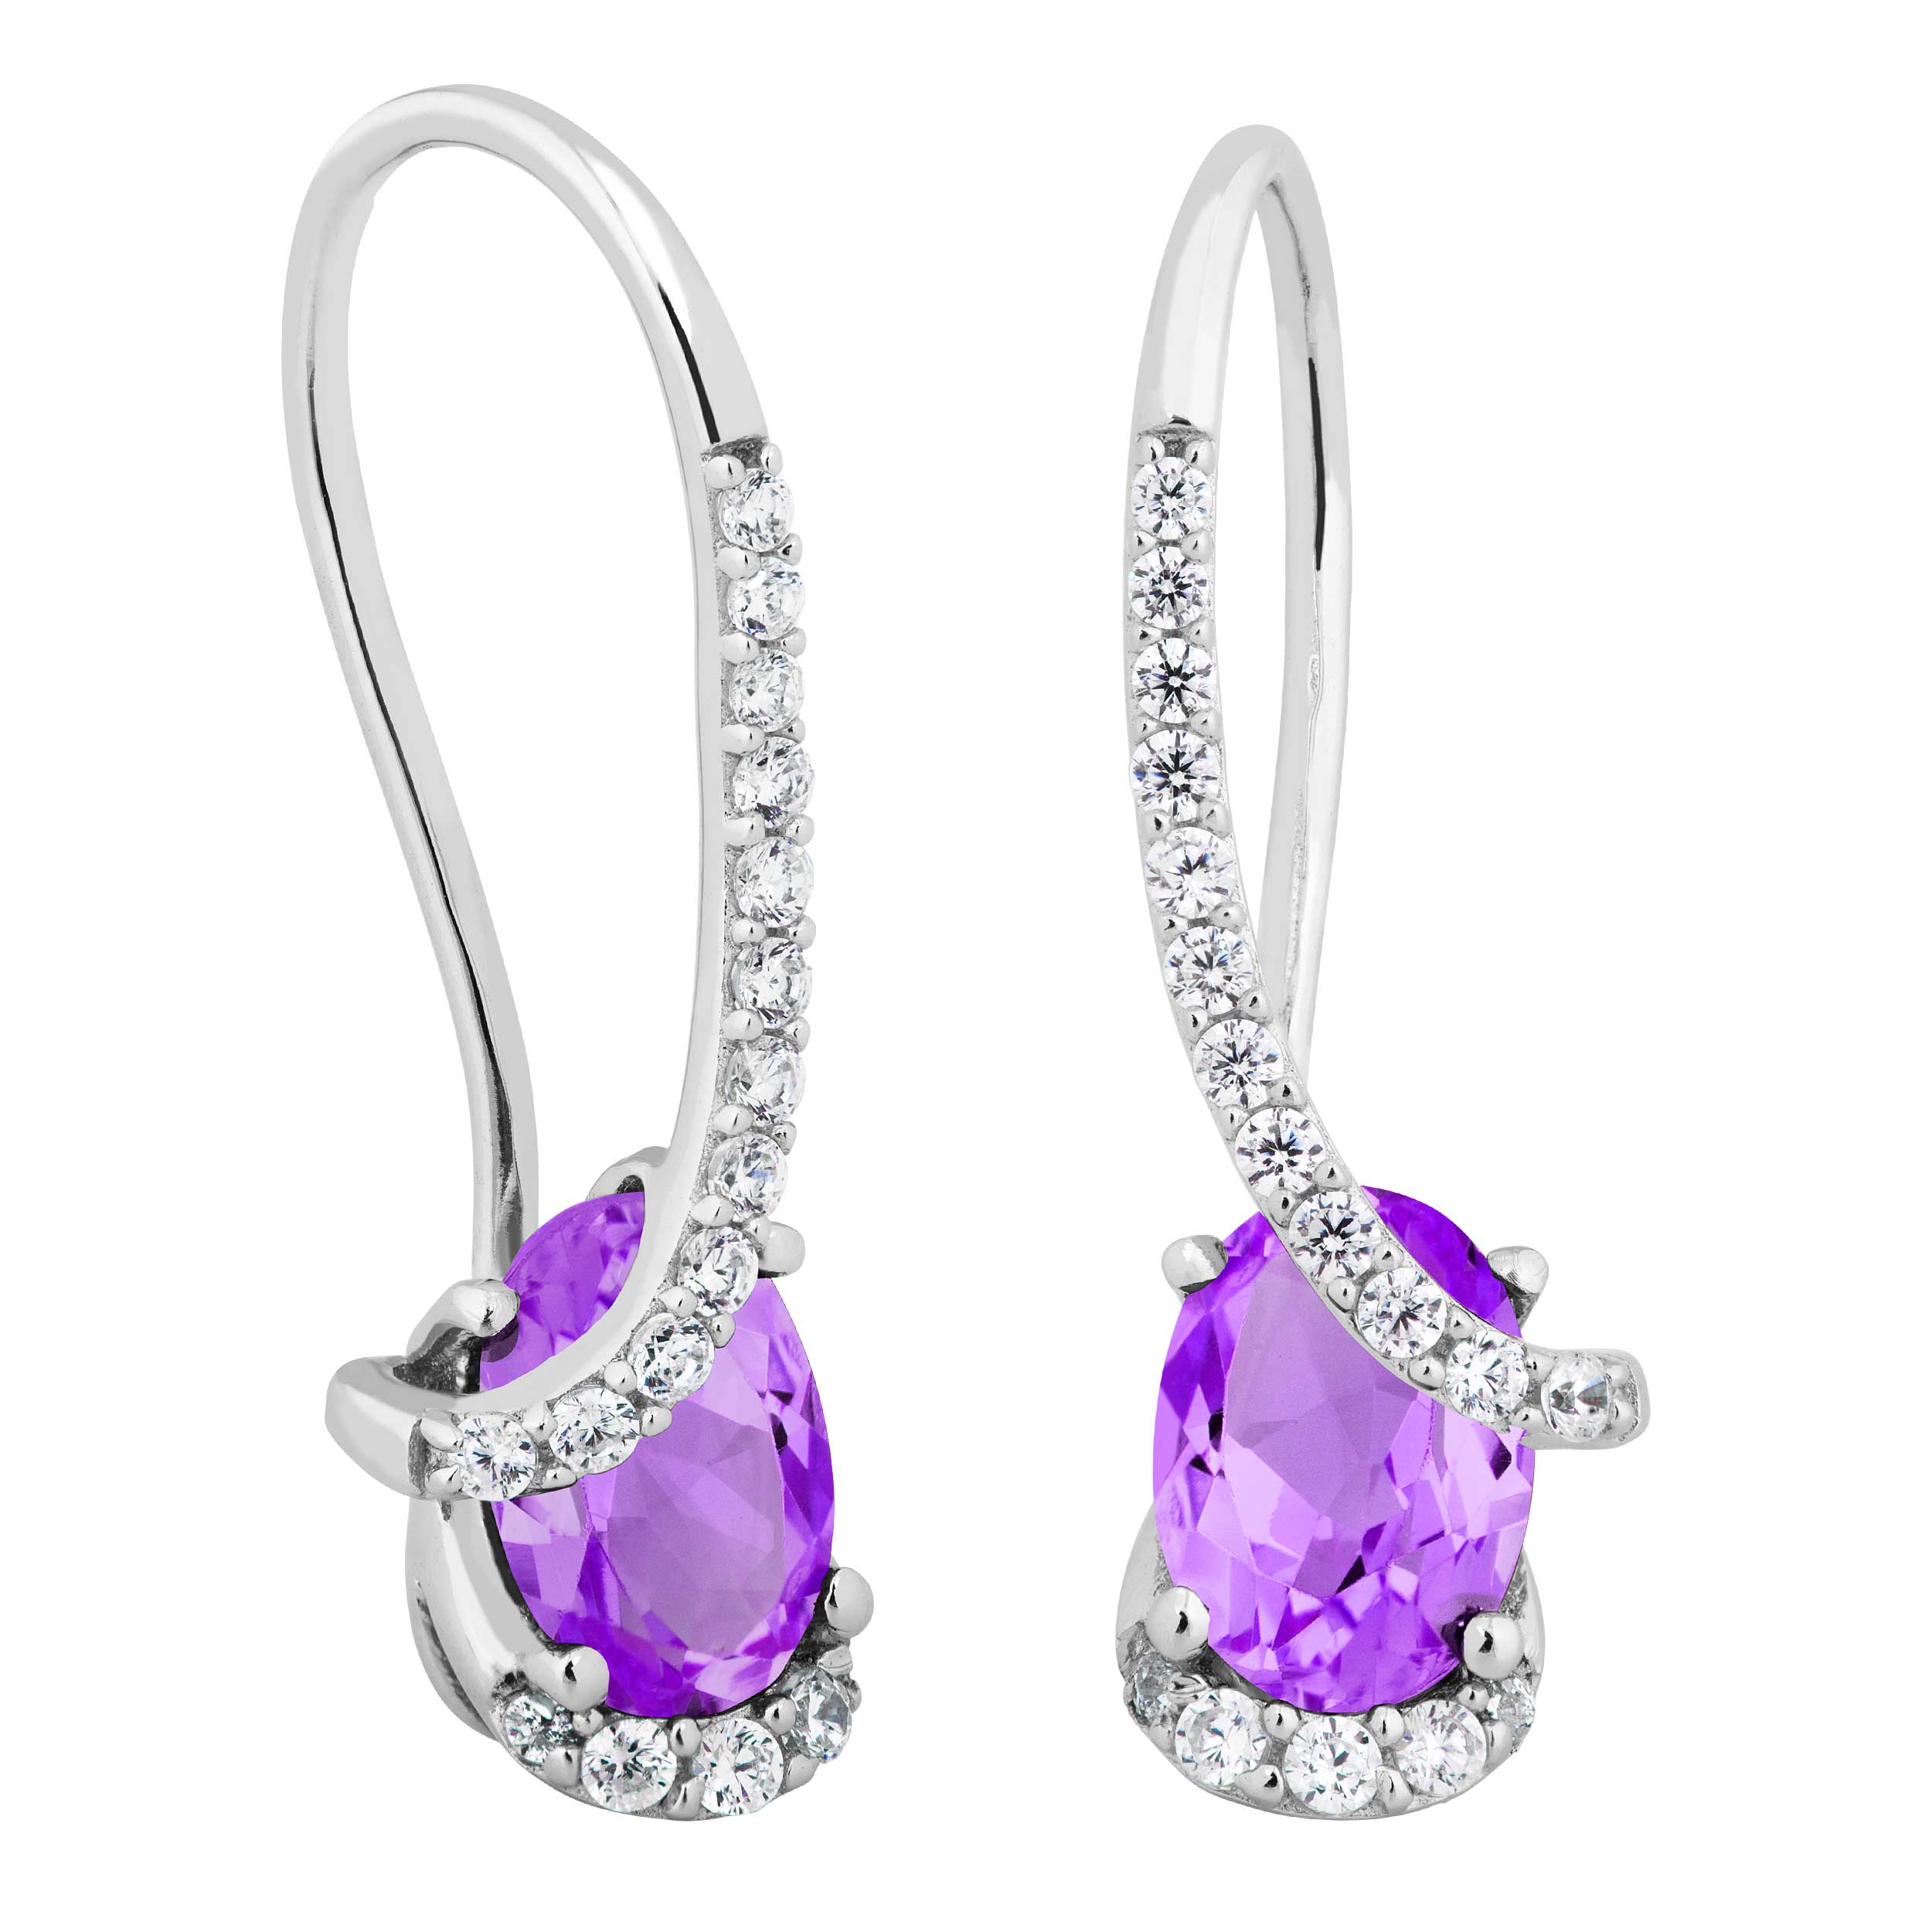 Oval  Brazillian Amethyst and White Topaz Earrings, Rhodium Plated Sterling Silver